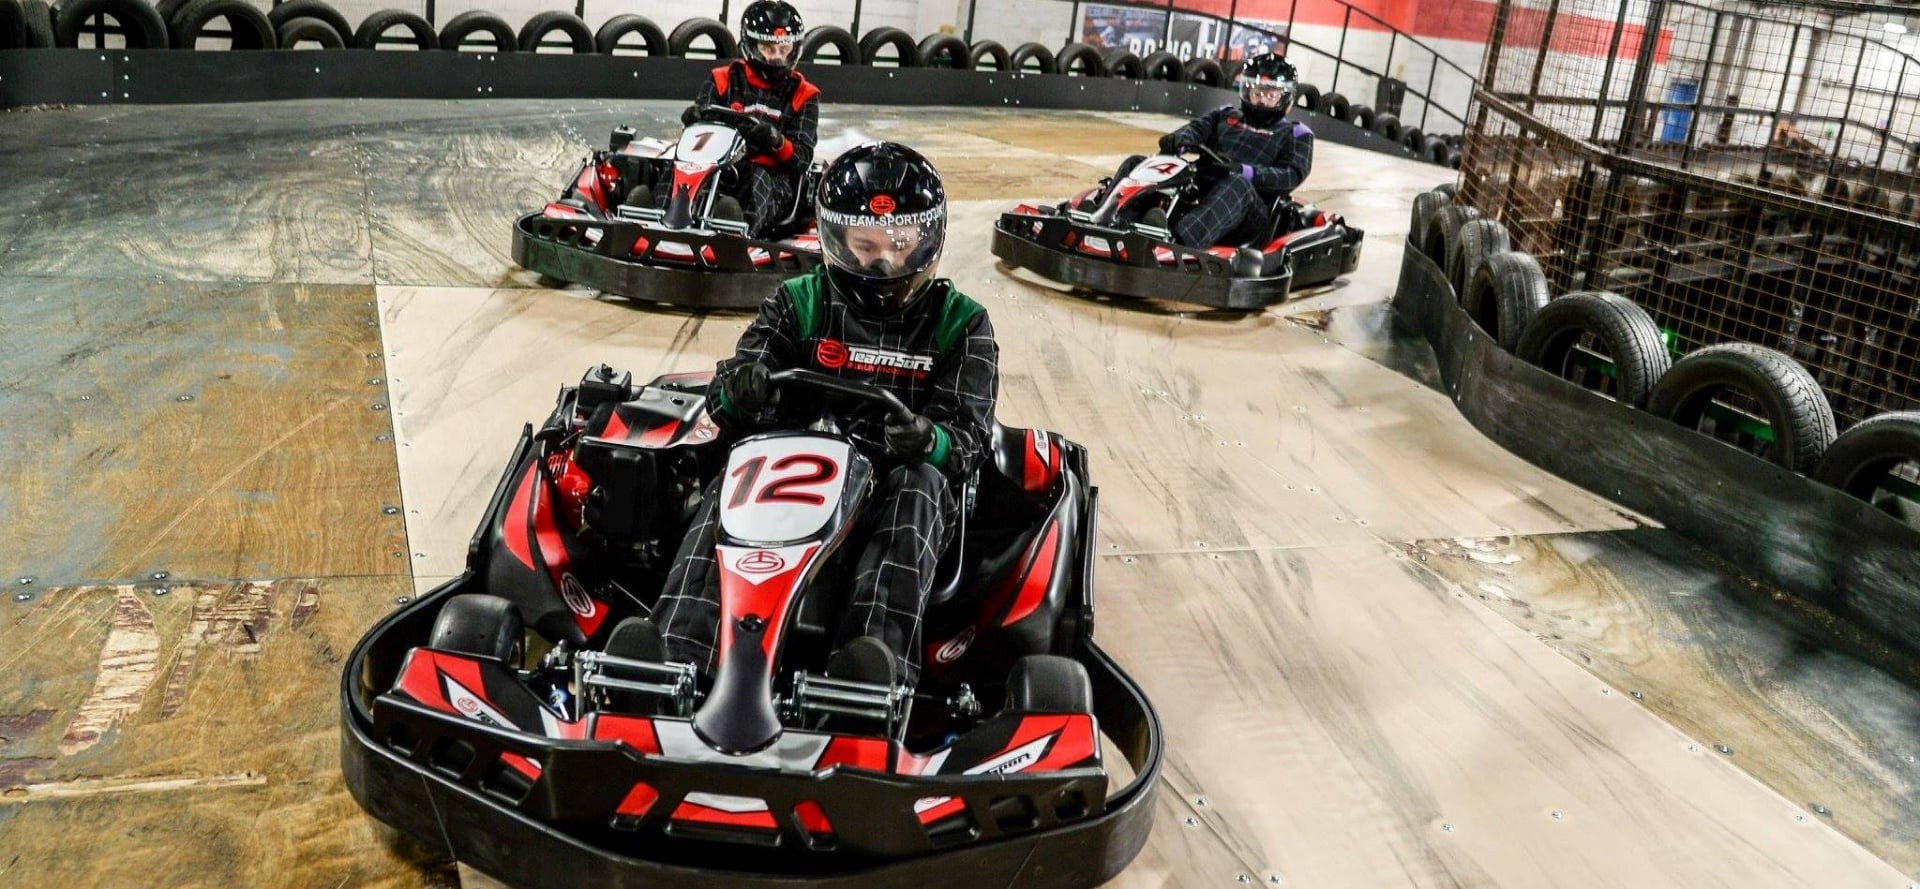 Indoor Go Karting Kids
 2x15 Minute Timed Go Karting Session for Adults and Kids